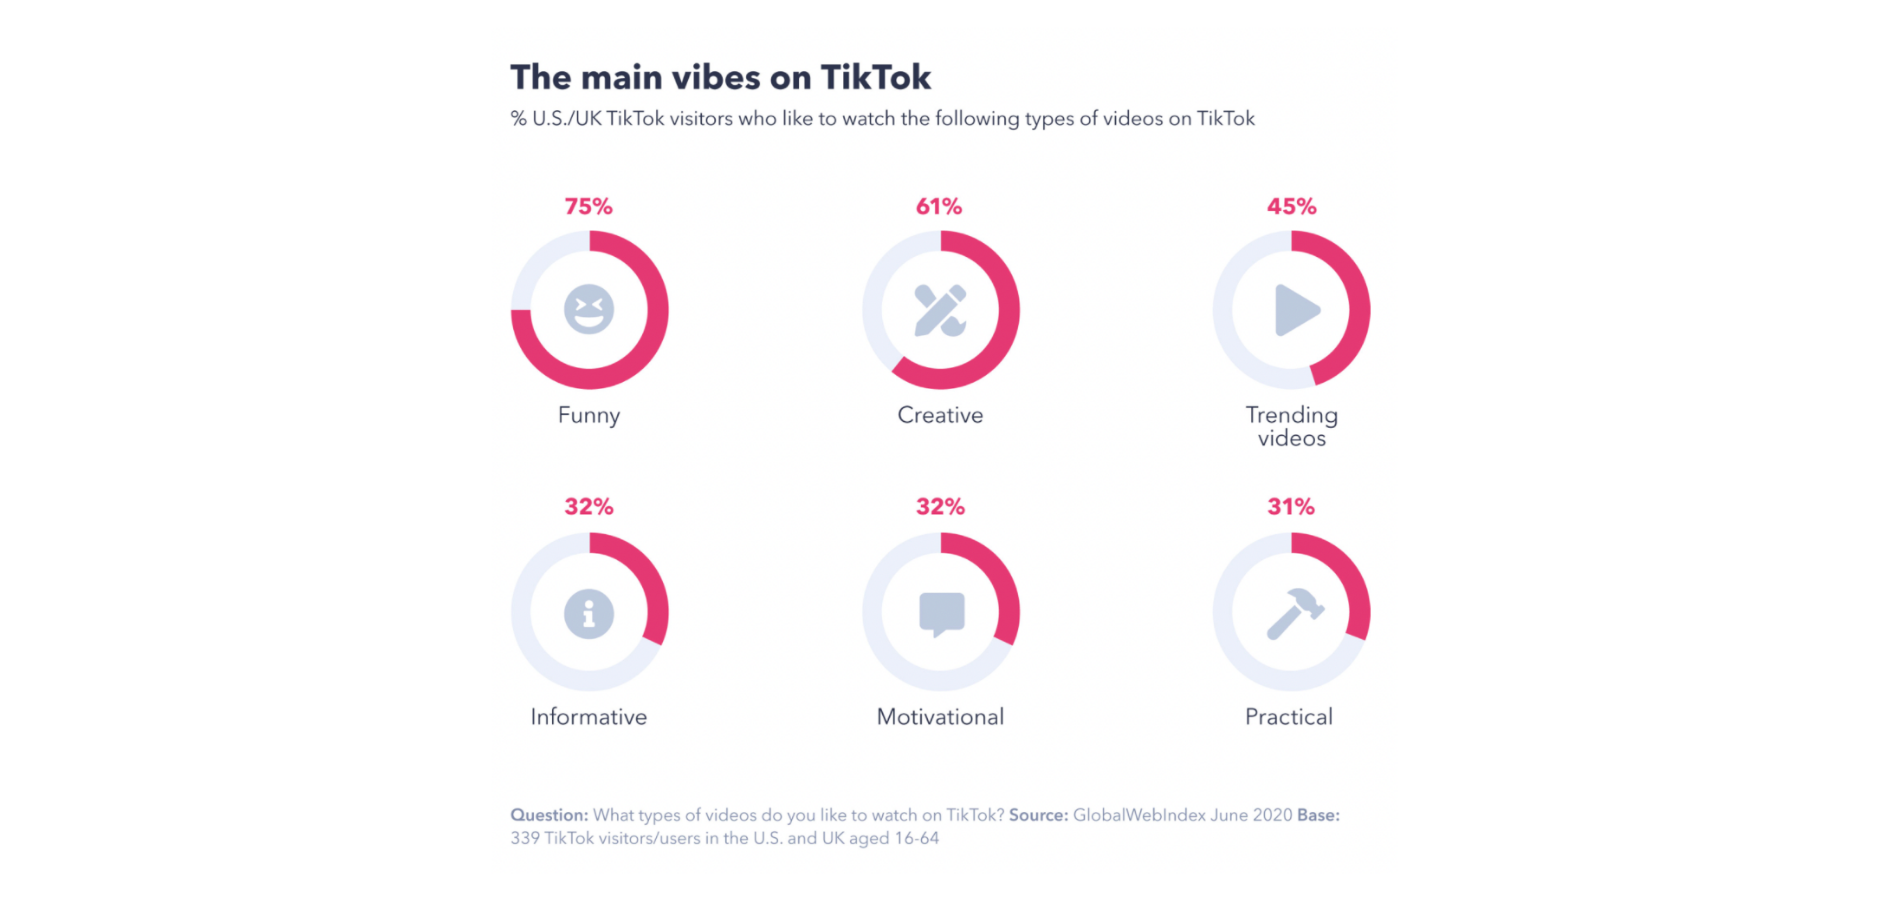 Here is a chart showing what are the main vibes on TikTok.